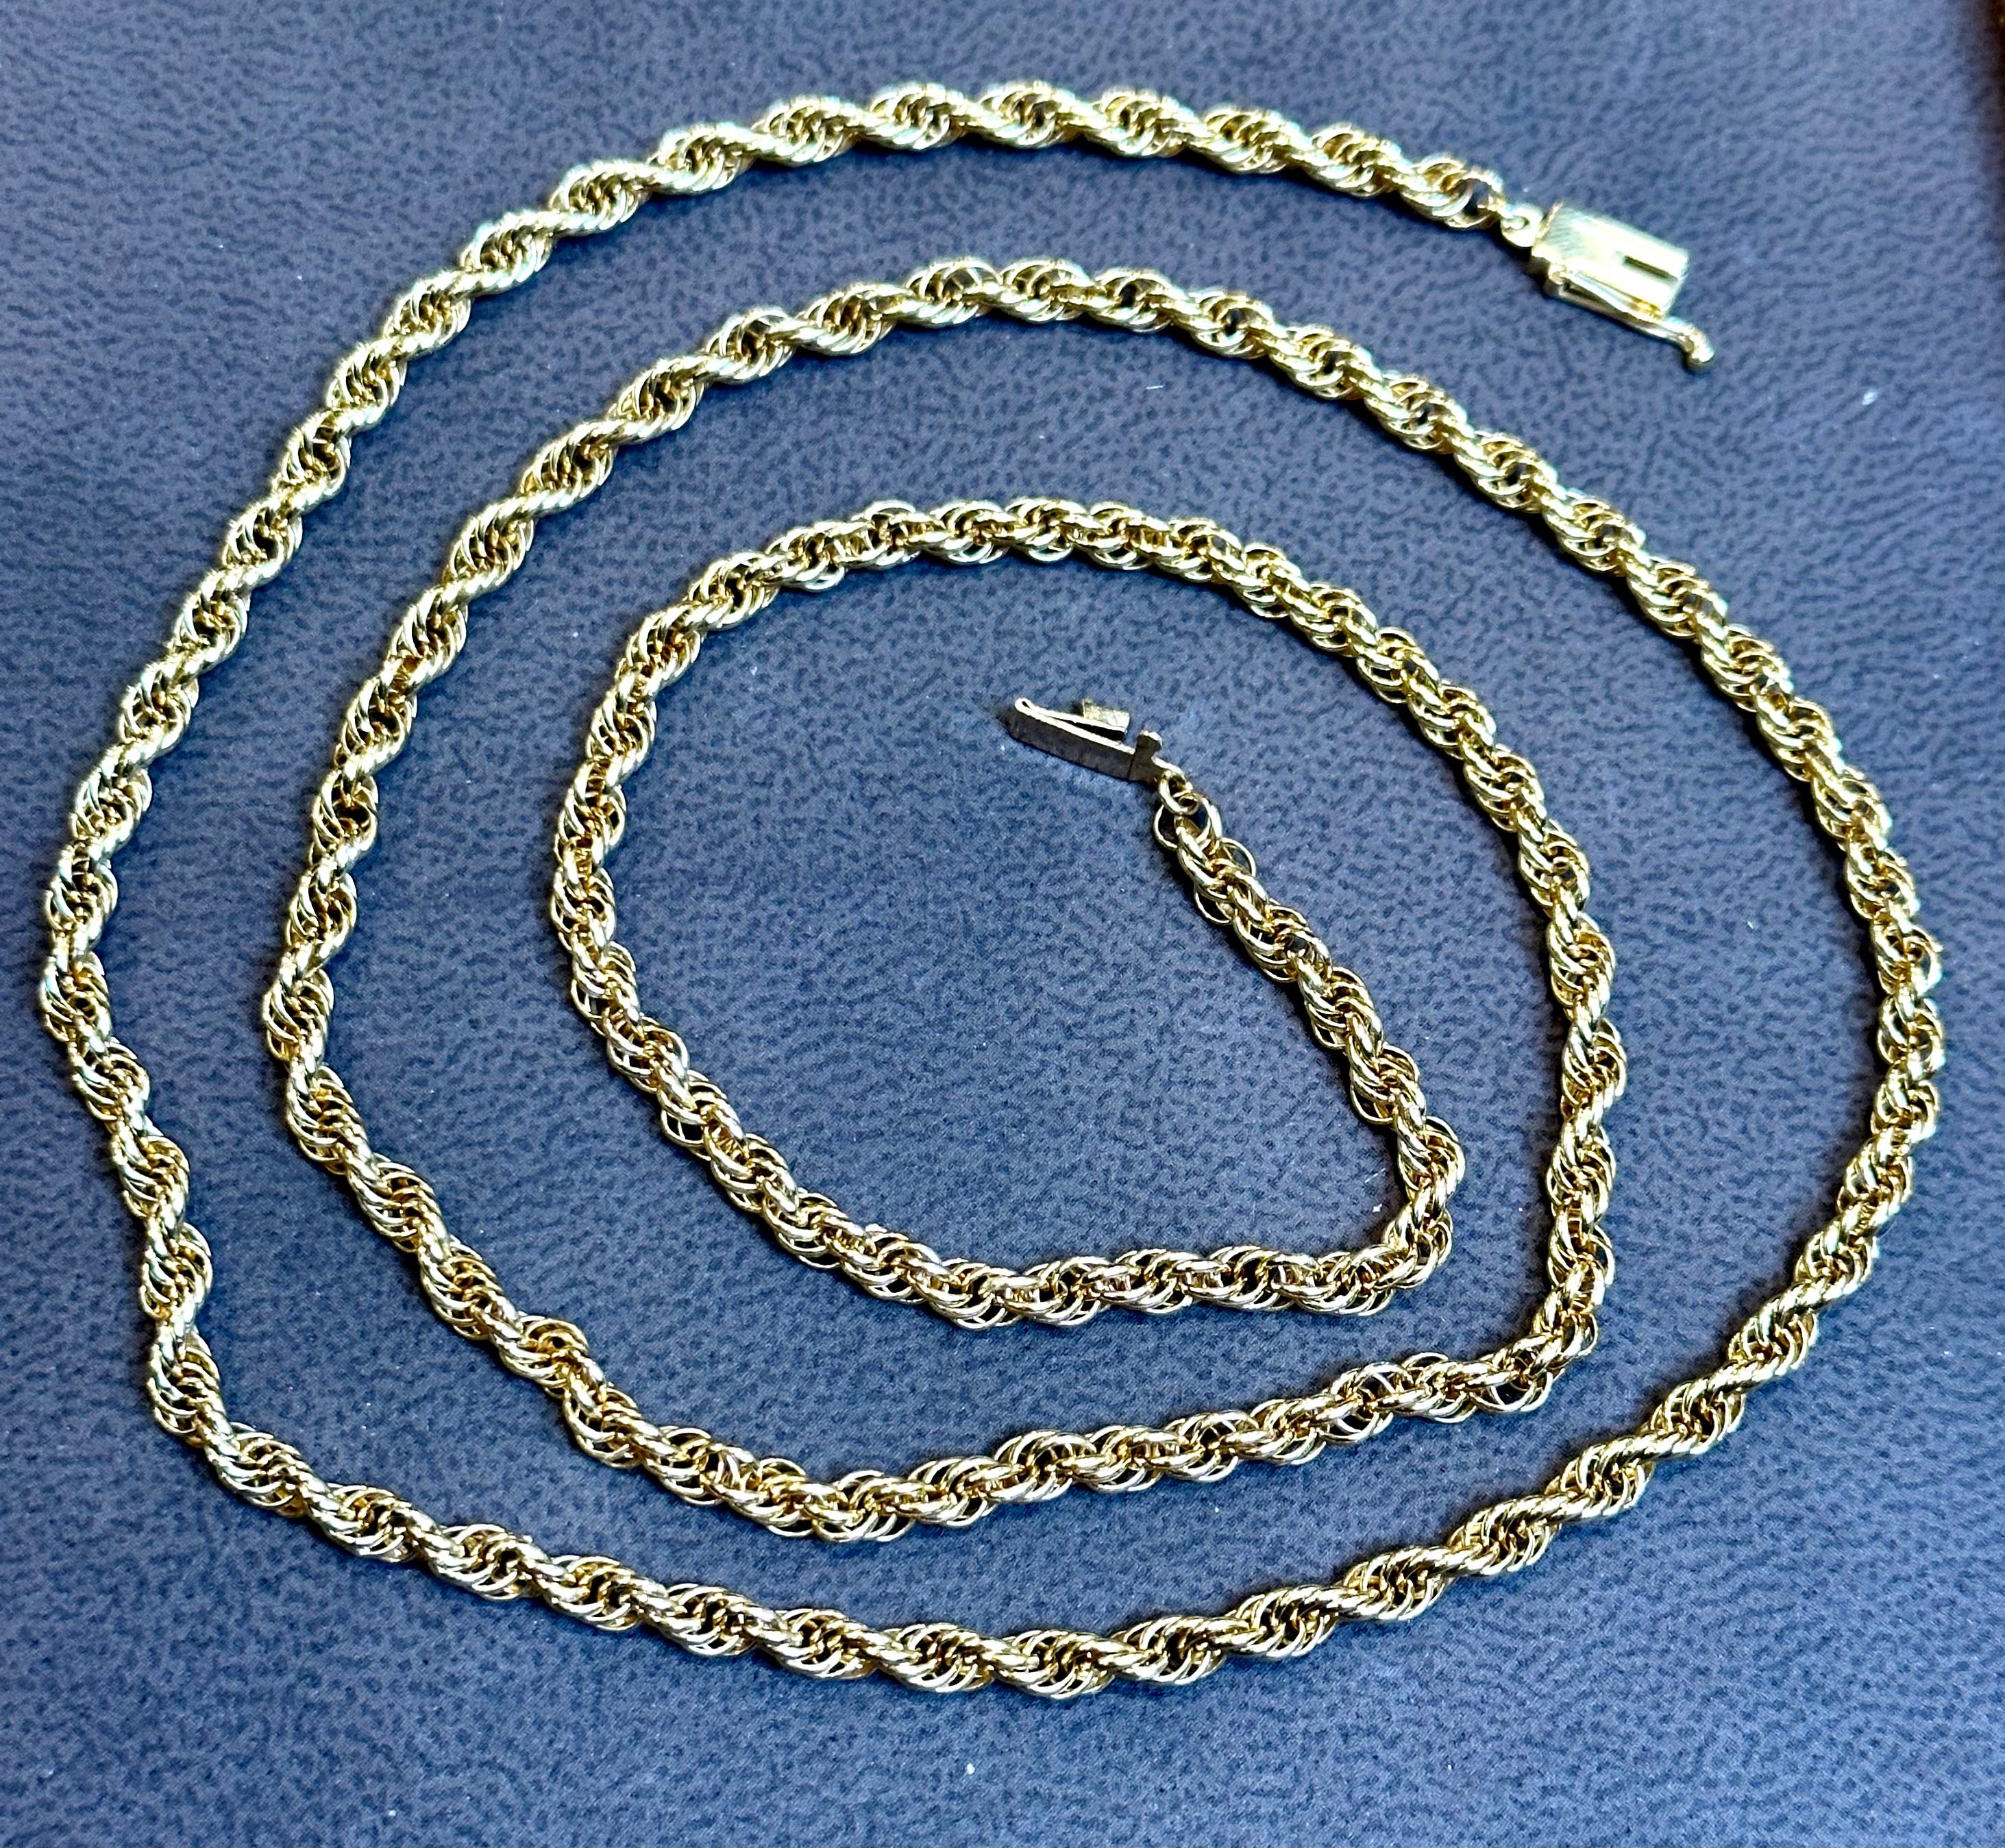 Vintage 14 Karat Yellow Gold 20.5 Gm, Rope Chain Necklace For Sale 1